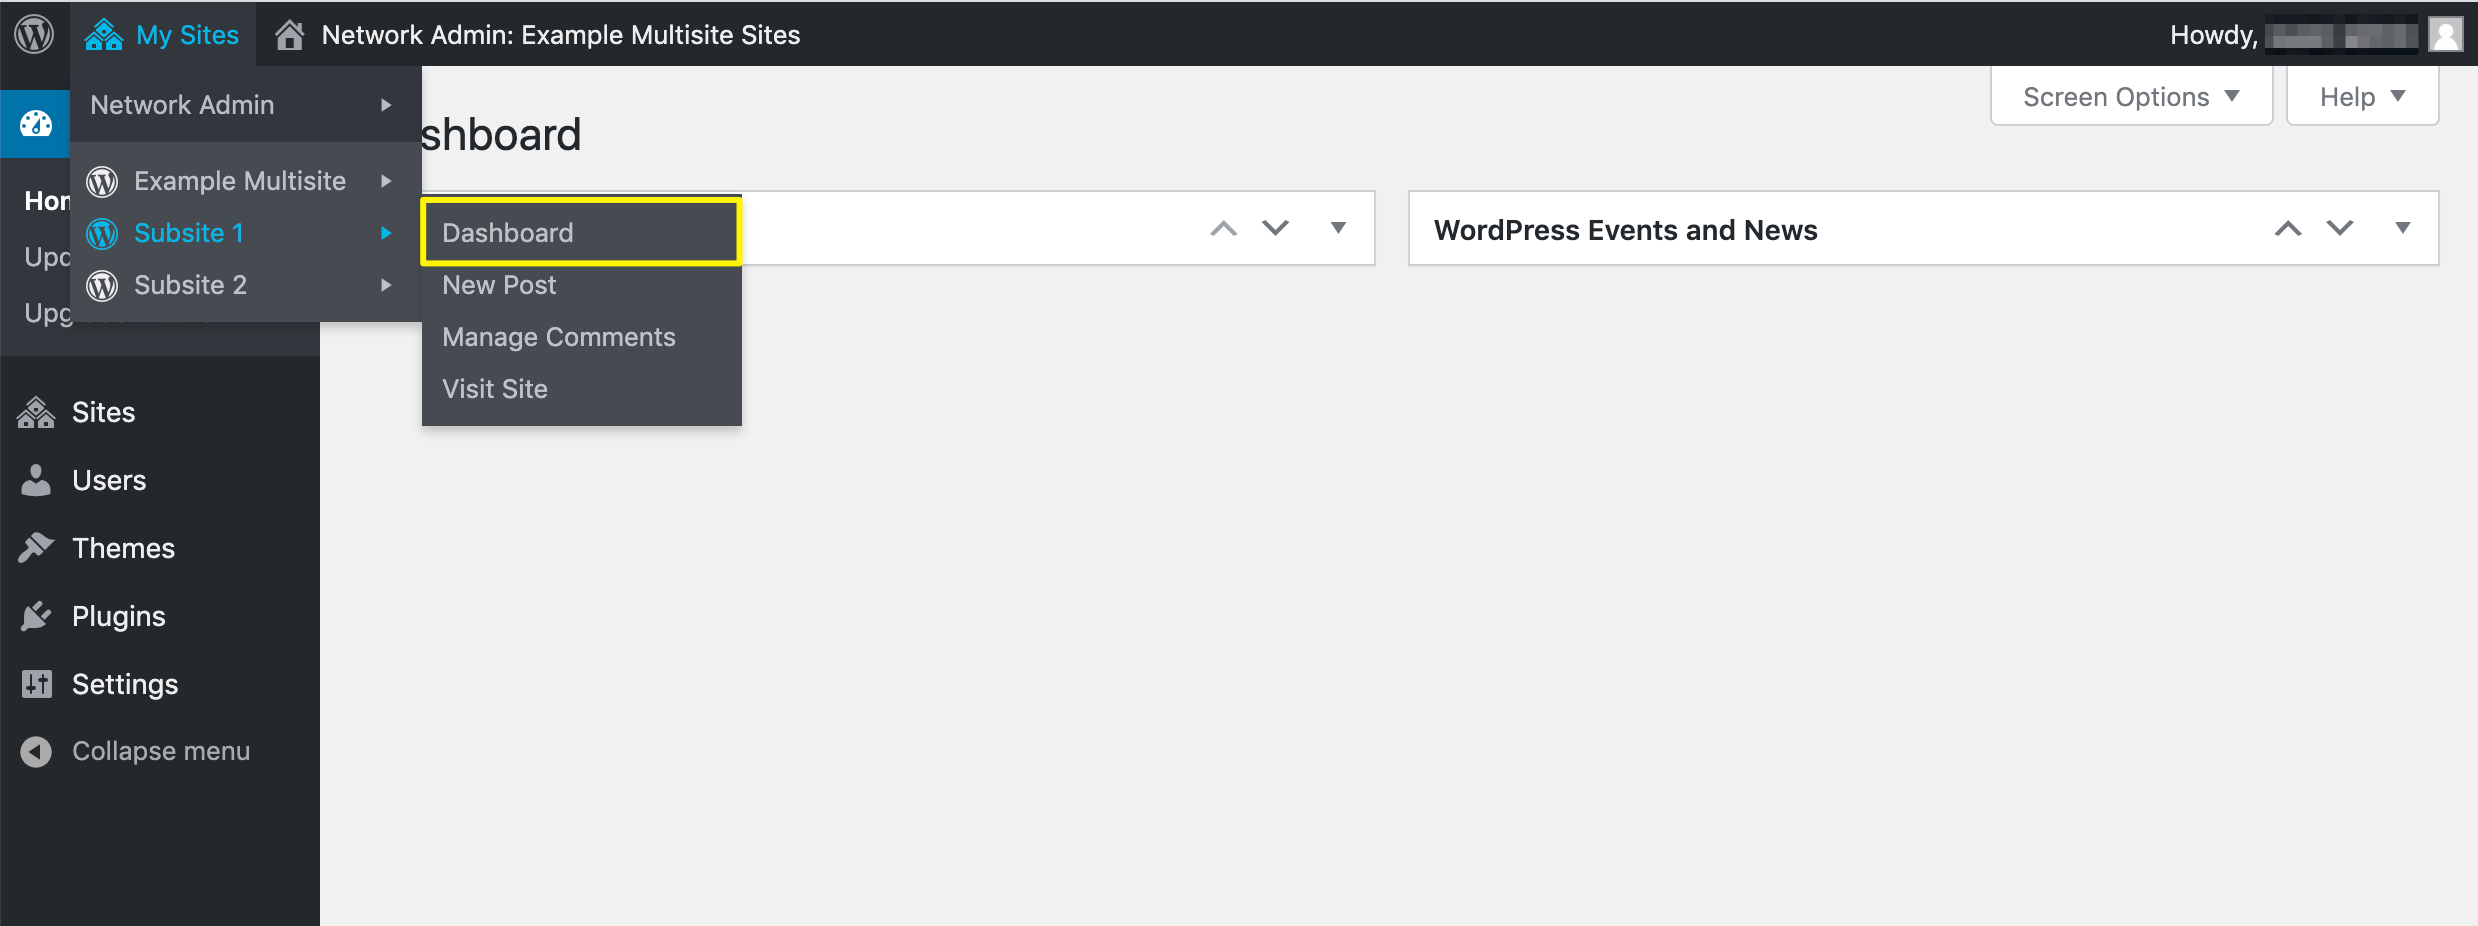 Accessing a subsite dashboard in WordPress multisite.